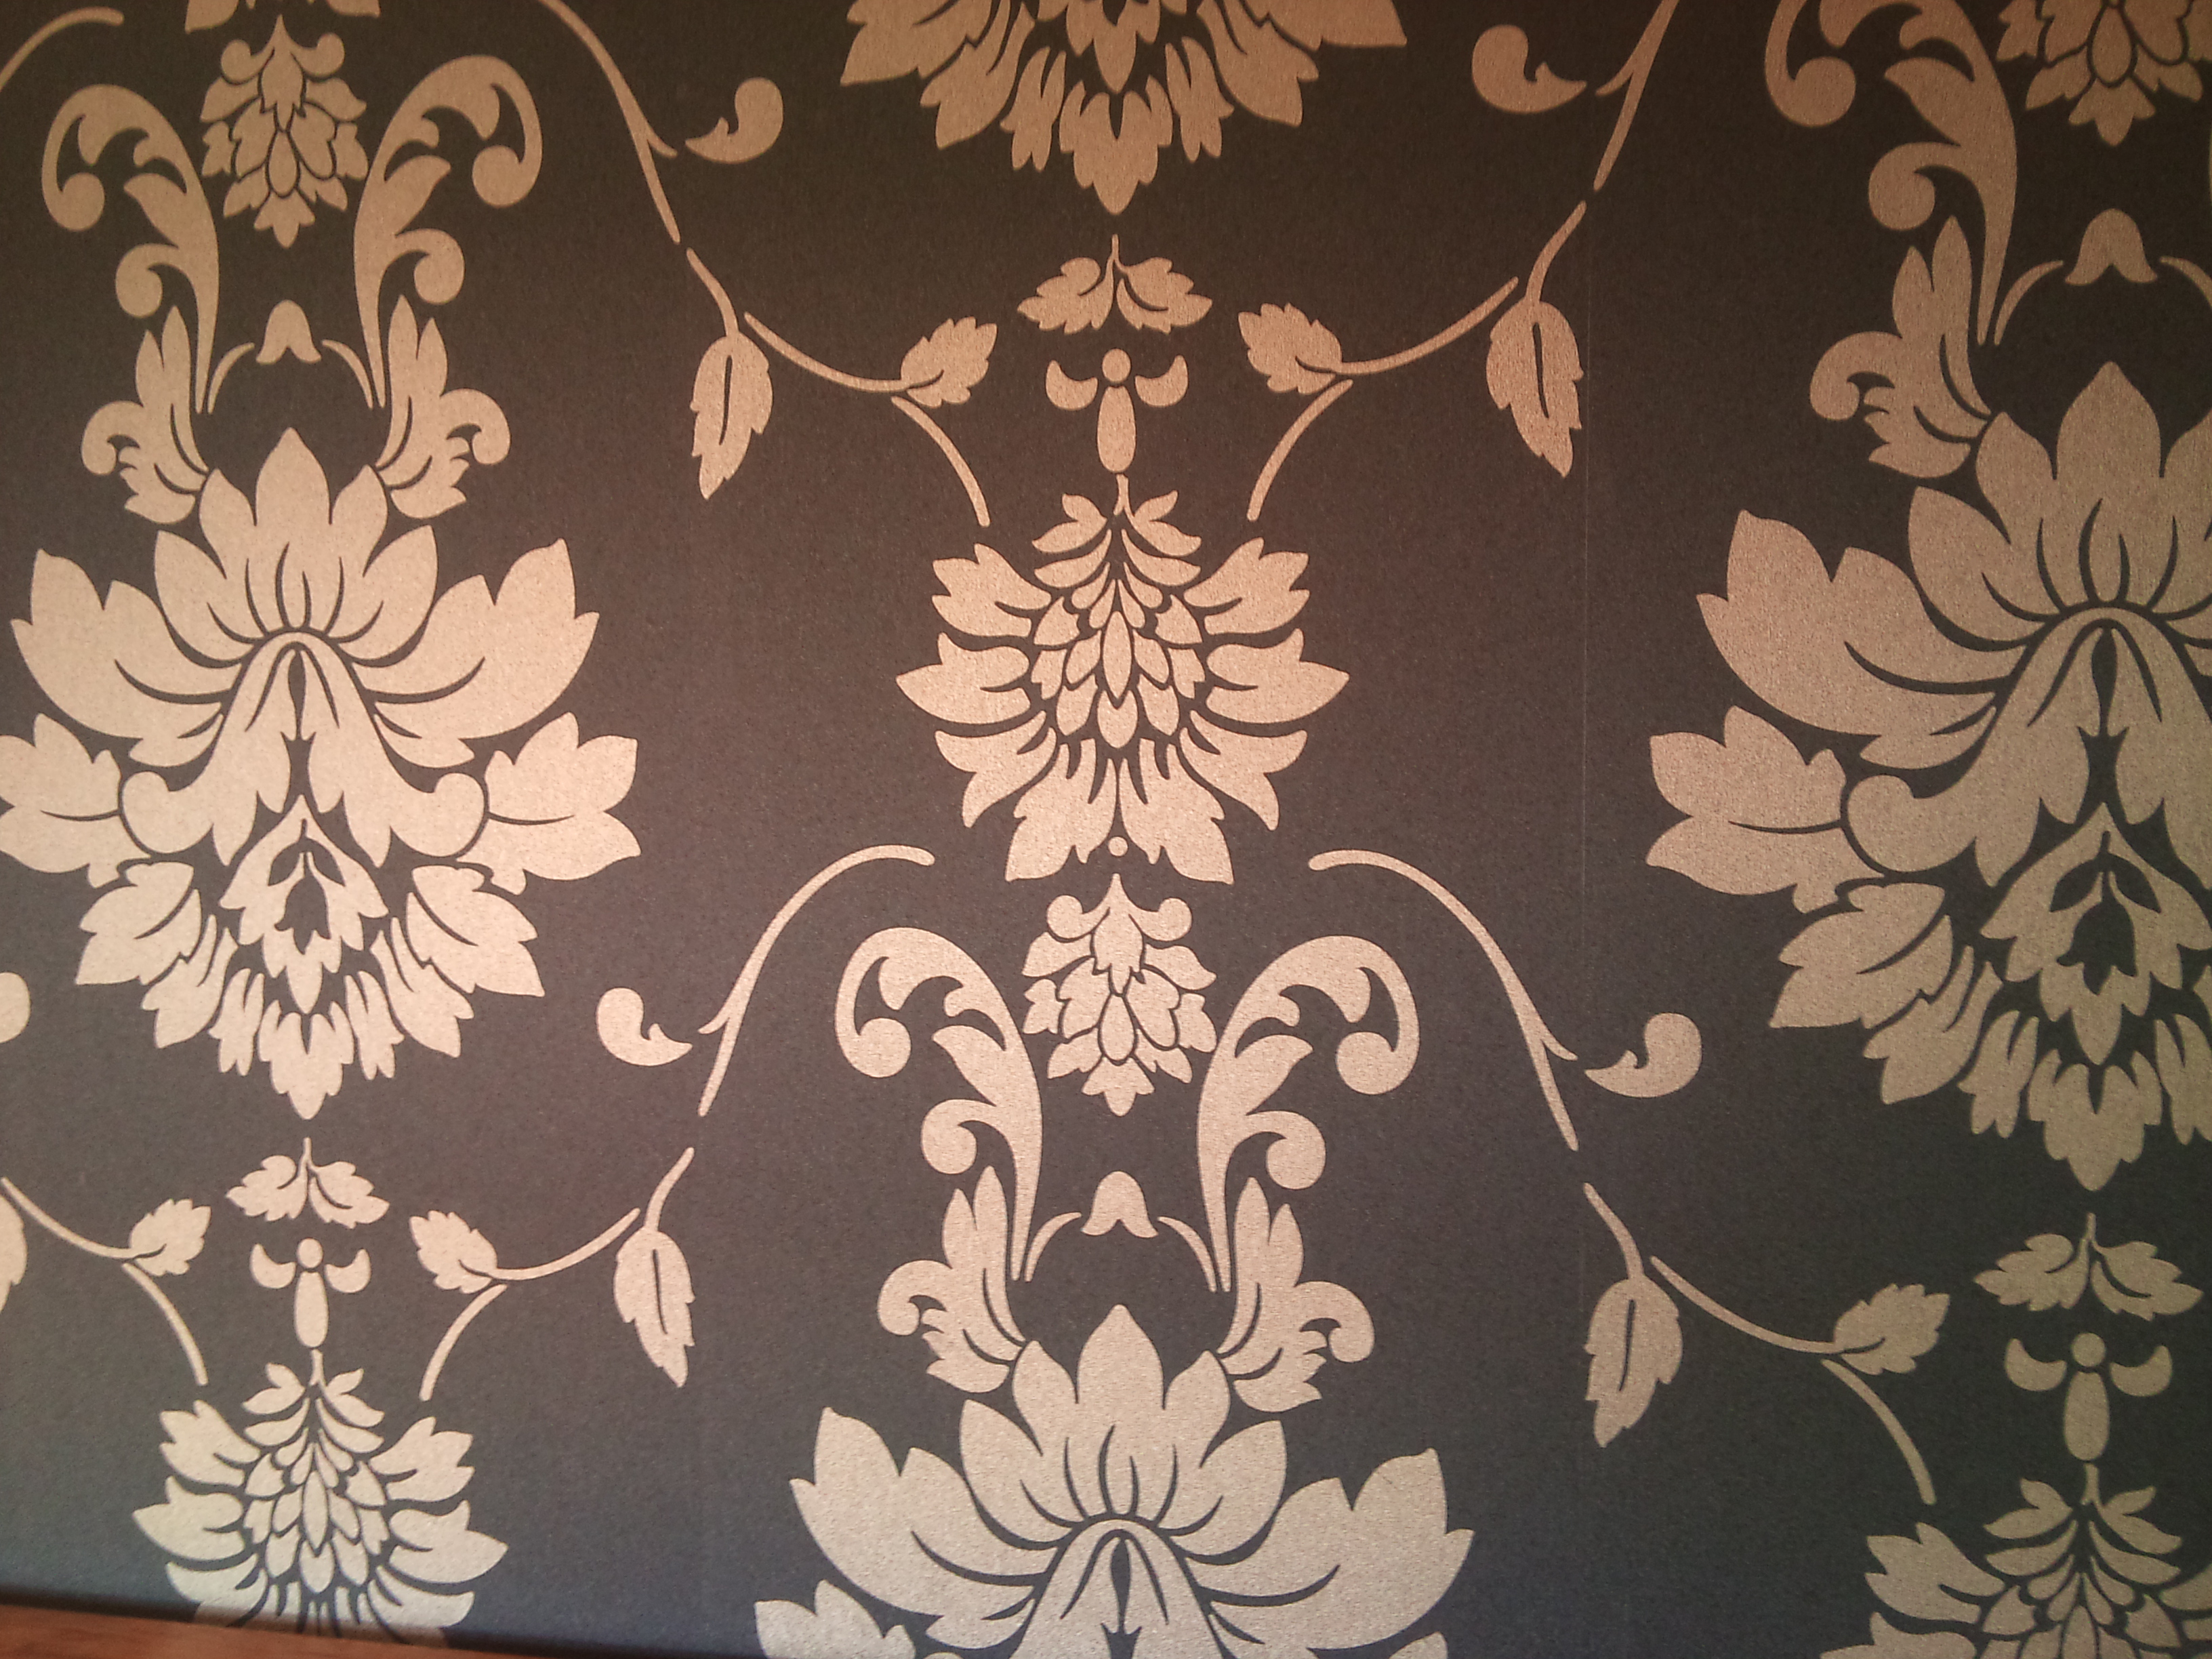 Hanging Wallpaper Examples From A Painter And Decorator In Essex